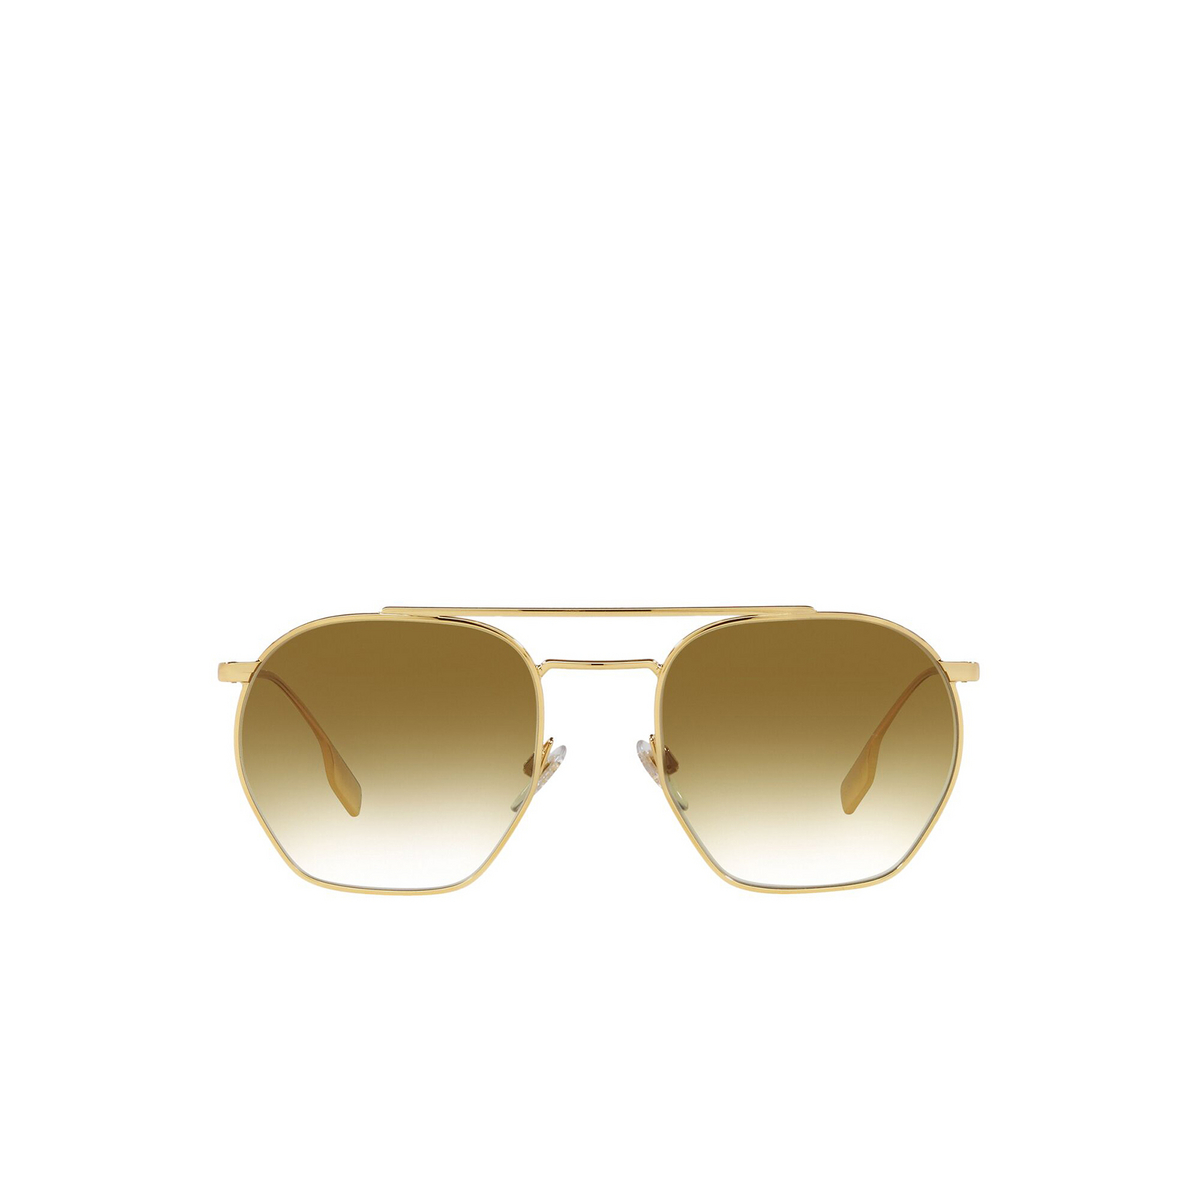 Burberry® Aviator Sunglasses: Ramsey BE3126 color Gold 10178E - front view.